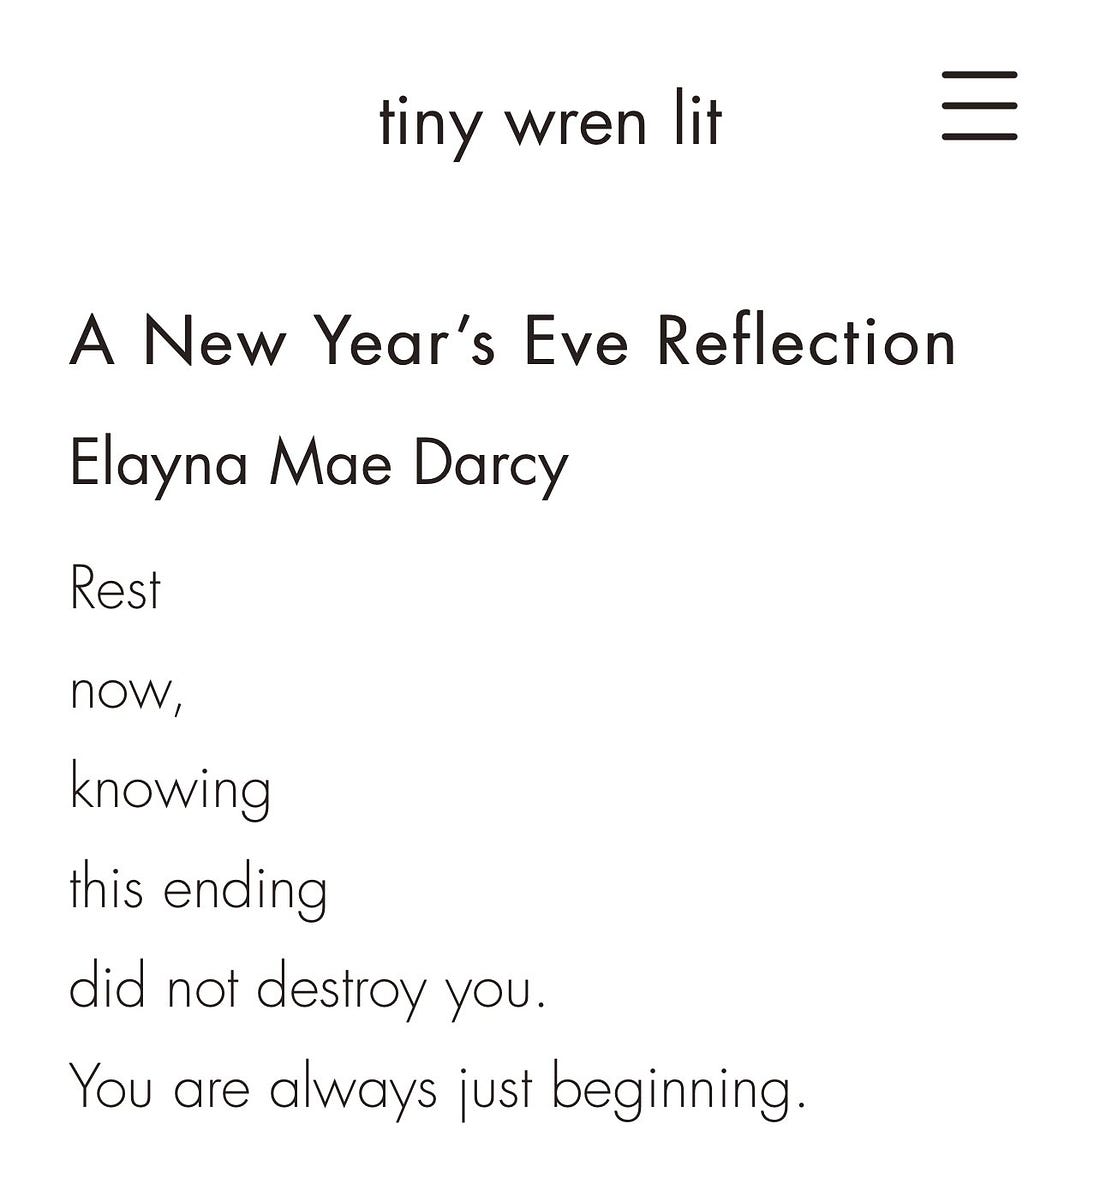 Screenshot of a white background with black text that says "tiny wren lit" in the header. Below it, it says, "A New Year's Eve Reflection" by Elayna Mae Darcy. The short poem reads: "Rest now, knowing this ending did not destroy you. You are always just beginning."